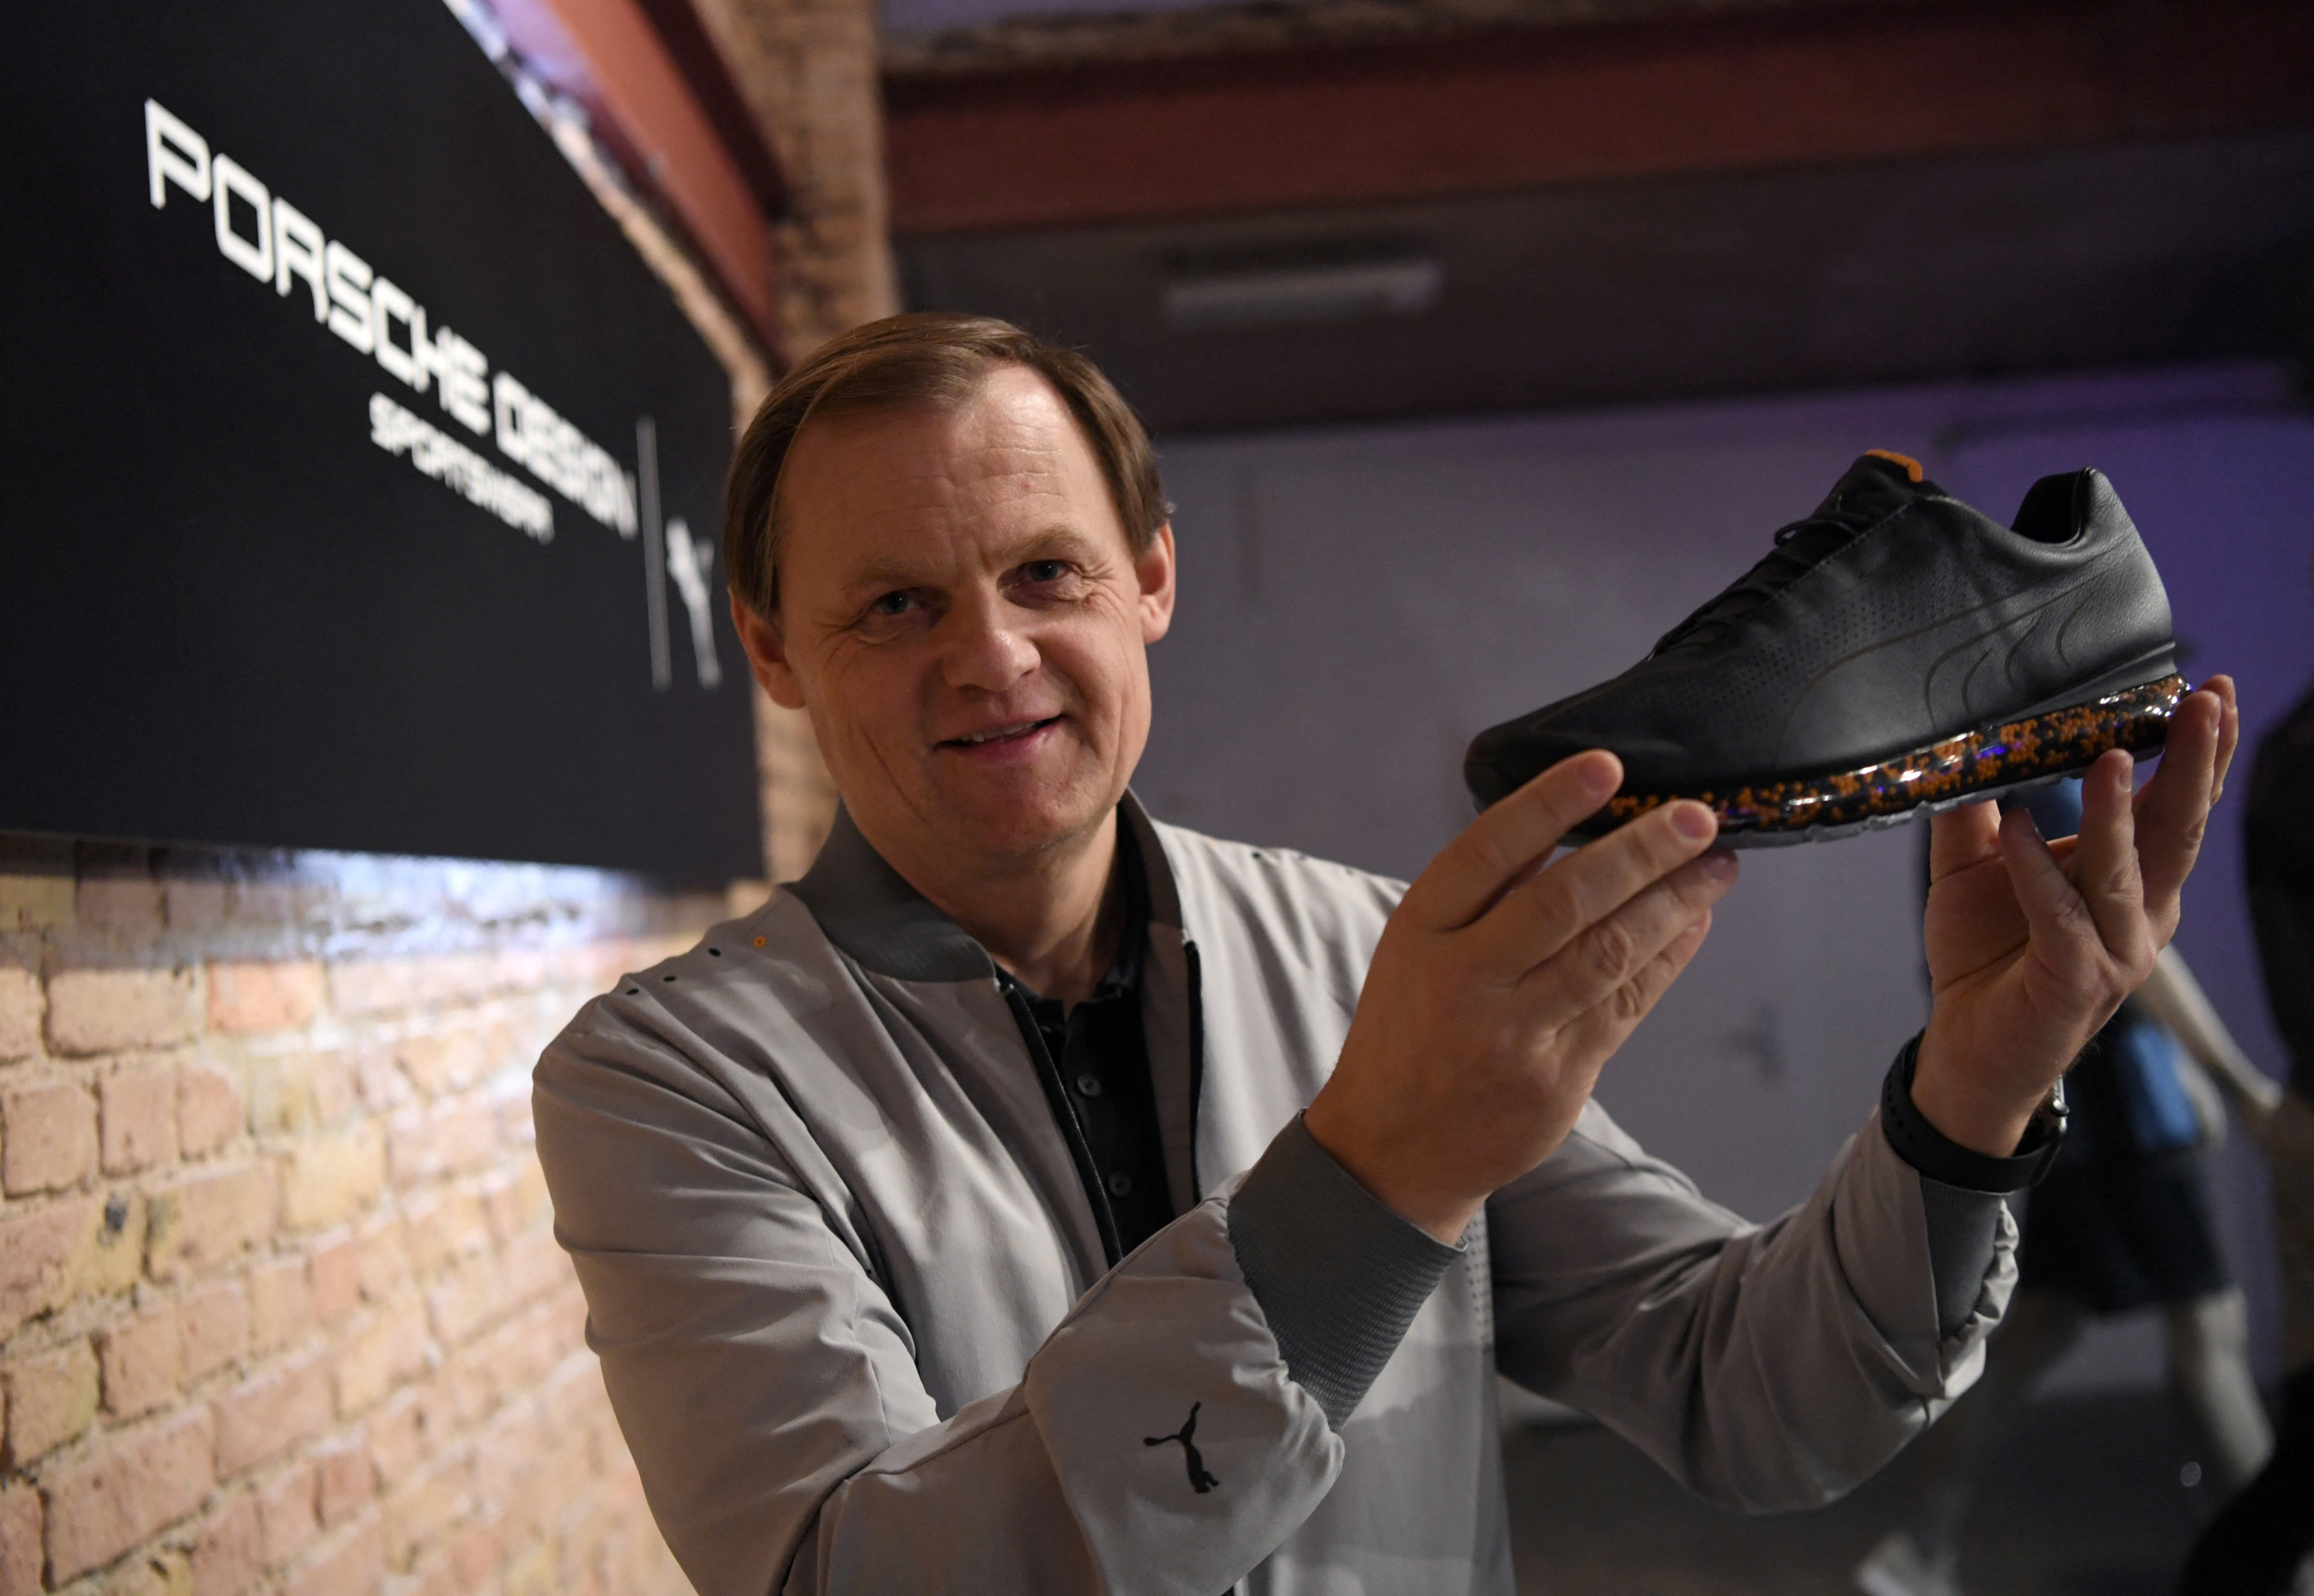 Puma CEO Gulden displays shoe at collection launch in collaboration with Porsche Design in Berlin